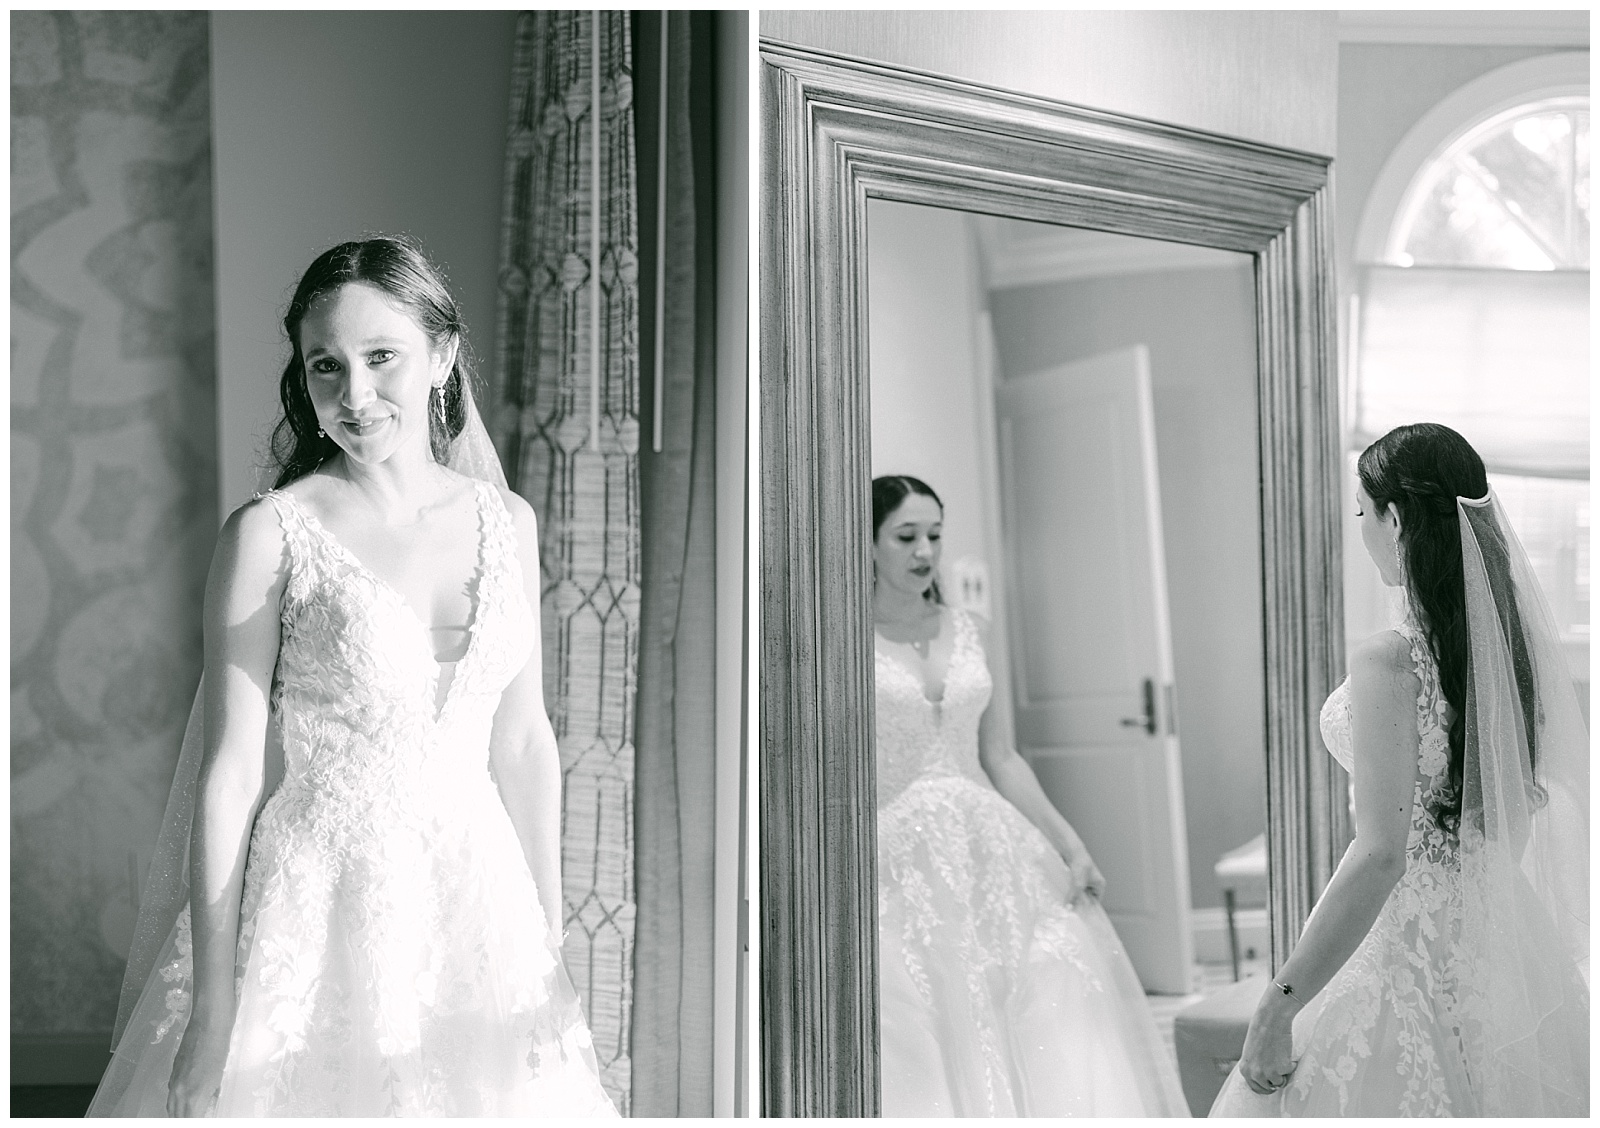 Left: Black and white bridal portrait before the first look.
Right: One final look in the mirror.
By Elizabeth Kane Photography at Disney's Riviera Resort in Orlando Florida